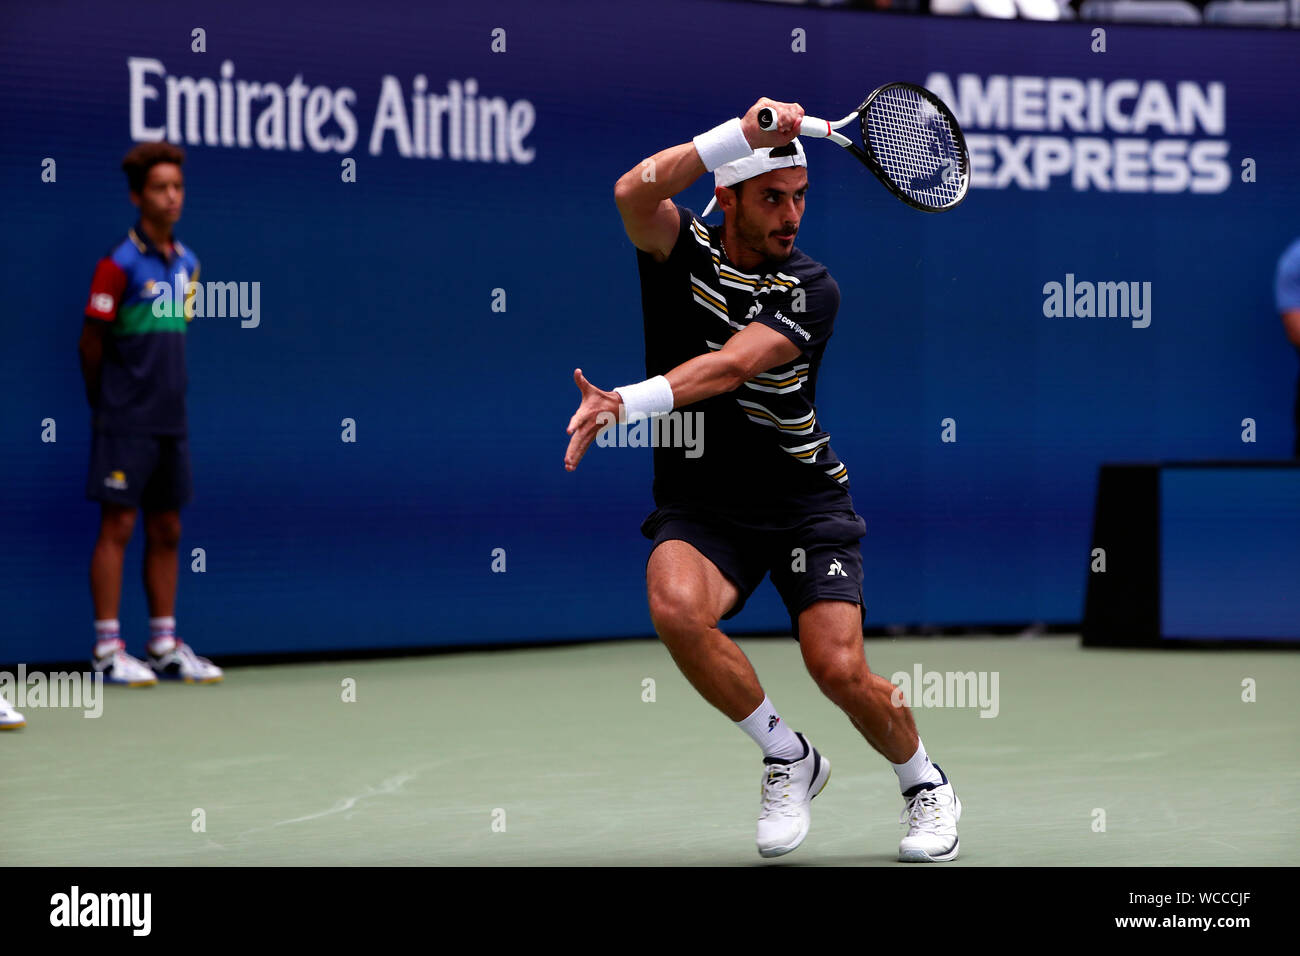 Flushing Meadows, New York, United States. 27th Aug, 2019. Thomas Fabbiano of Italy during his first round match against Dominic Thiem of Austria at the US Open in Flushing Meadows, New York. Fabiano won the match in four sets. Credit: Adam Stoltman/Alamy Live News Stock Photo